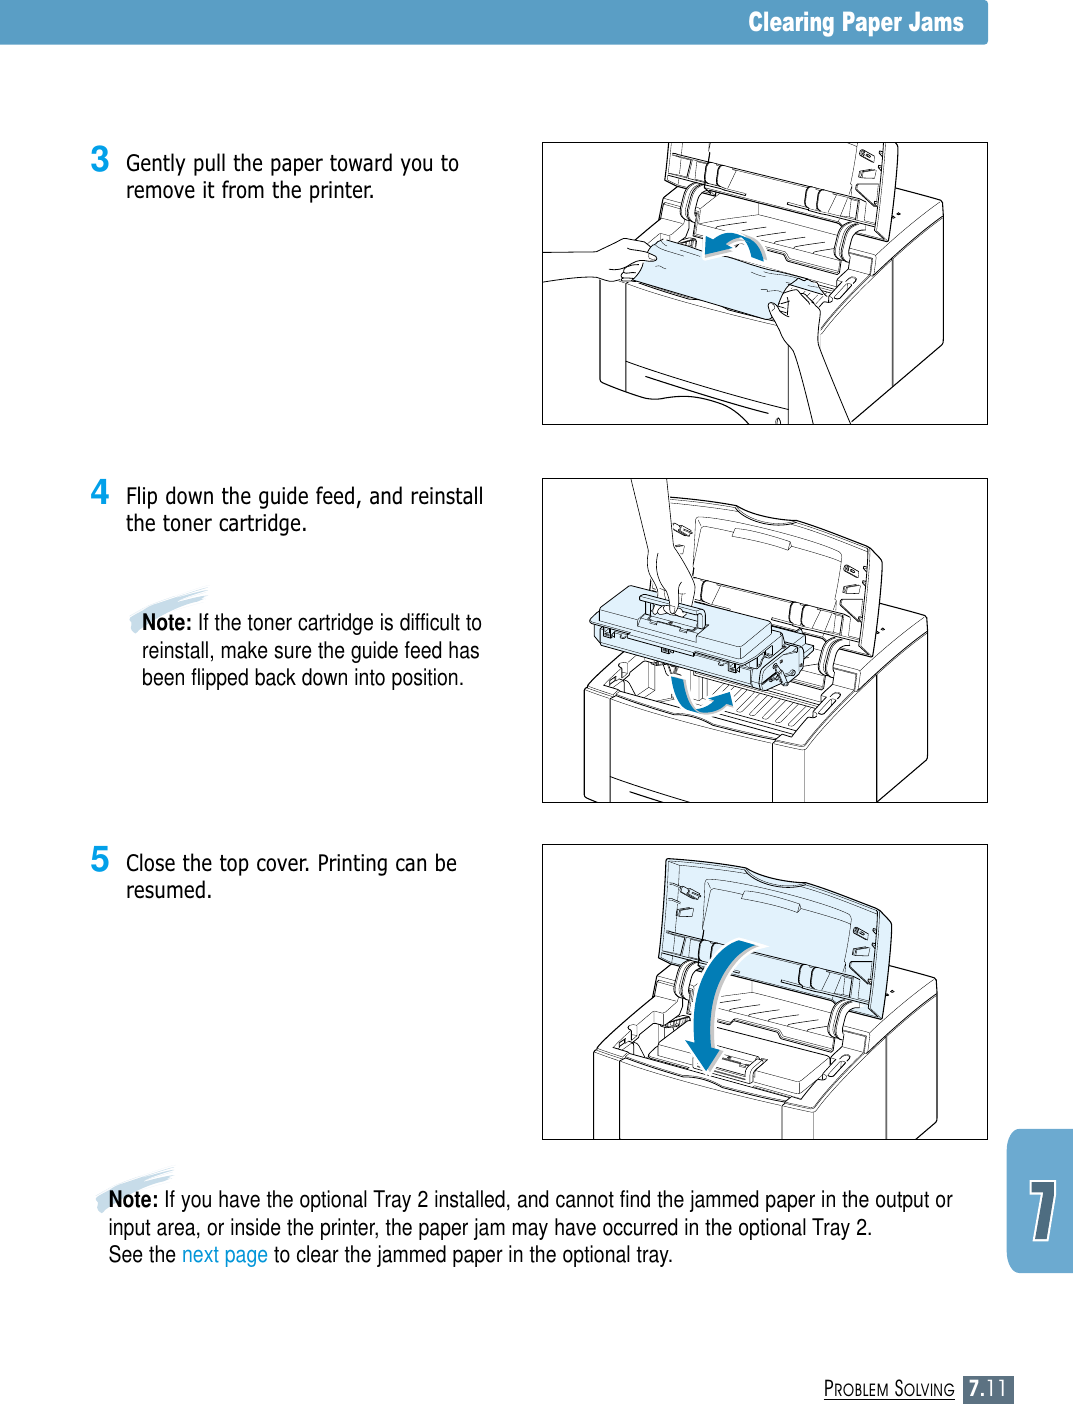 7.11PROBLEM SOLVINGClearing Paper Jams3Gently pull the paper toward you toremove it from the printer.4Flip down the guide feed, and reinstallthe toner cartridge.Note: If the toner cartridge is difficult toreinstall, make sure the guide feed hasbeen flipped back down into position.5Close the top cover. Printing can beresumed.Note: If you have the optional Tray 2 installed, and cannot find the jammed paper in the output orinput area, or inside the printer, the paper jam may have occurred in the optional Tray 2. See the next page to clear the jammed paper in the optional tray.